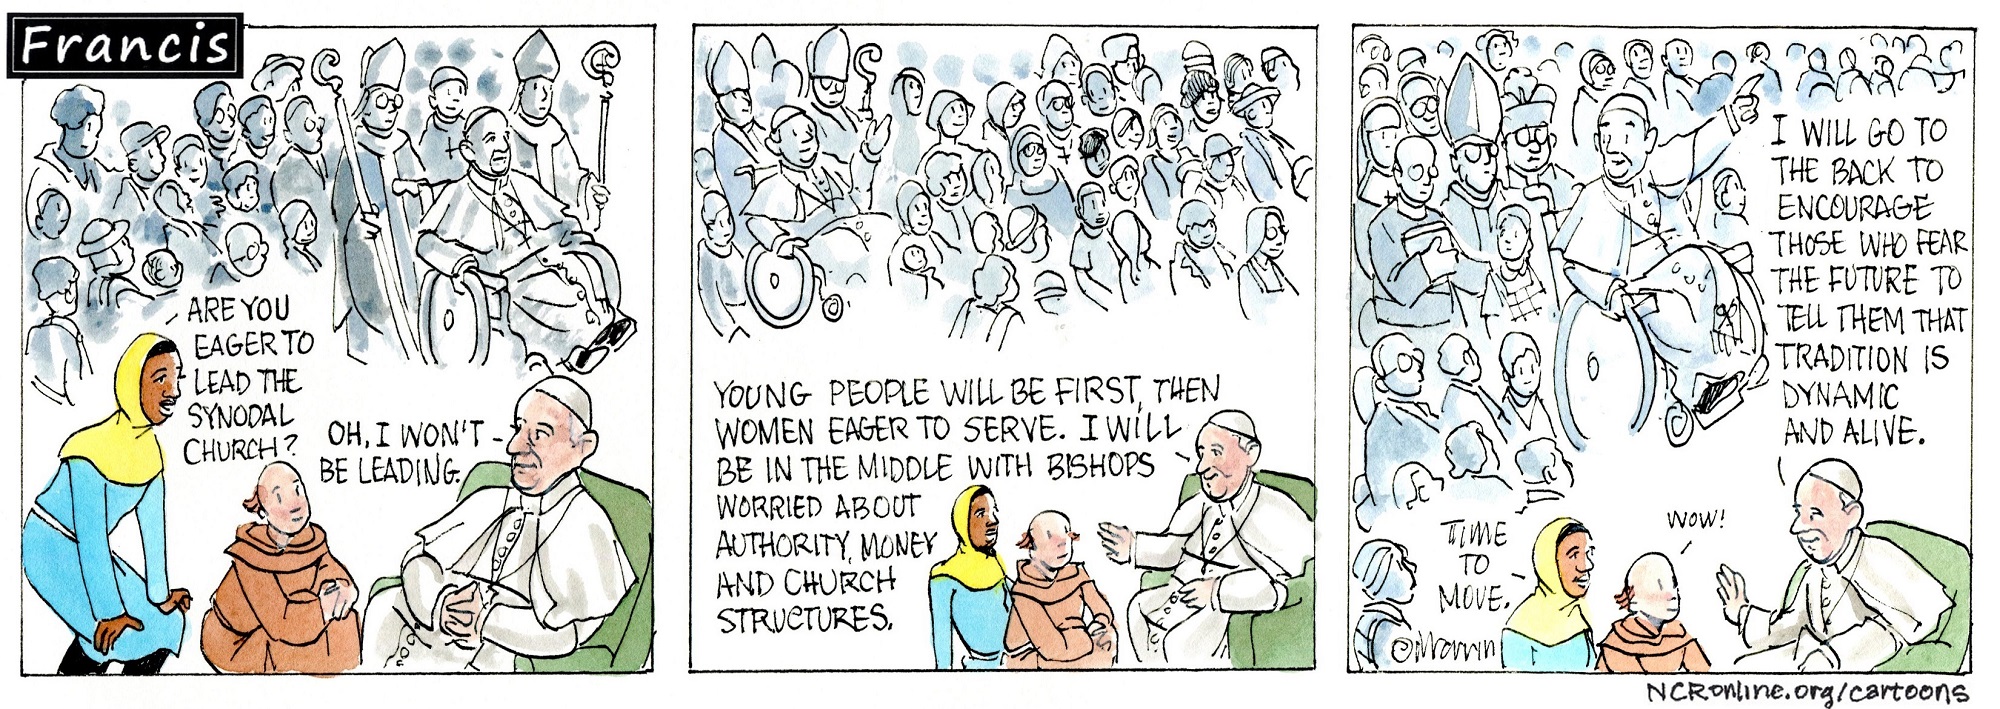 Francis, the comic strip: Is Francis eager to lead the synodal church?